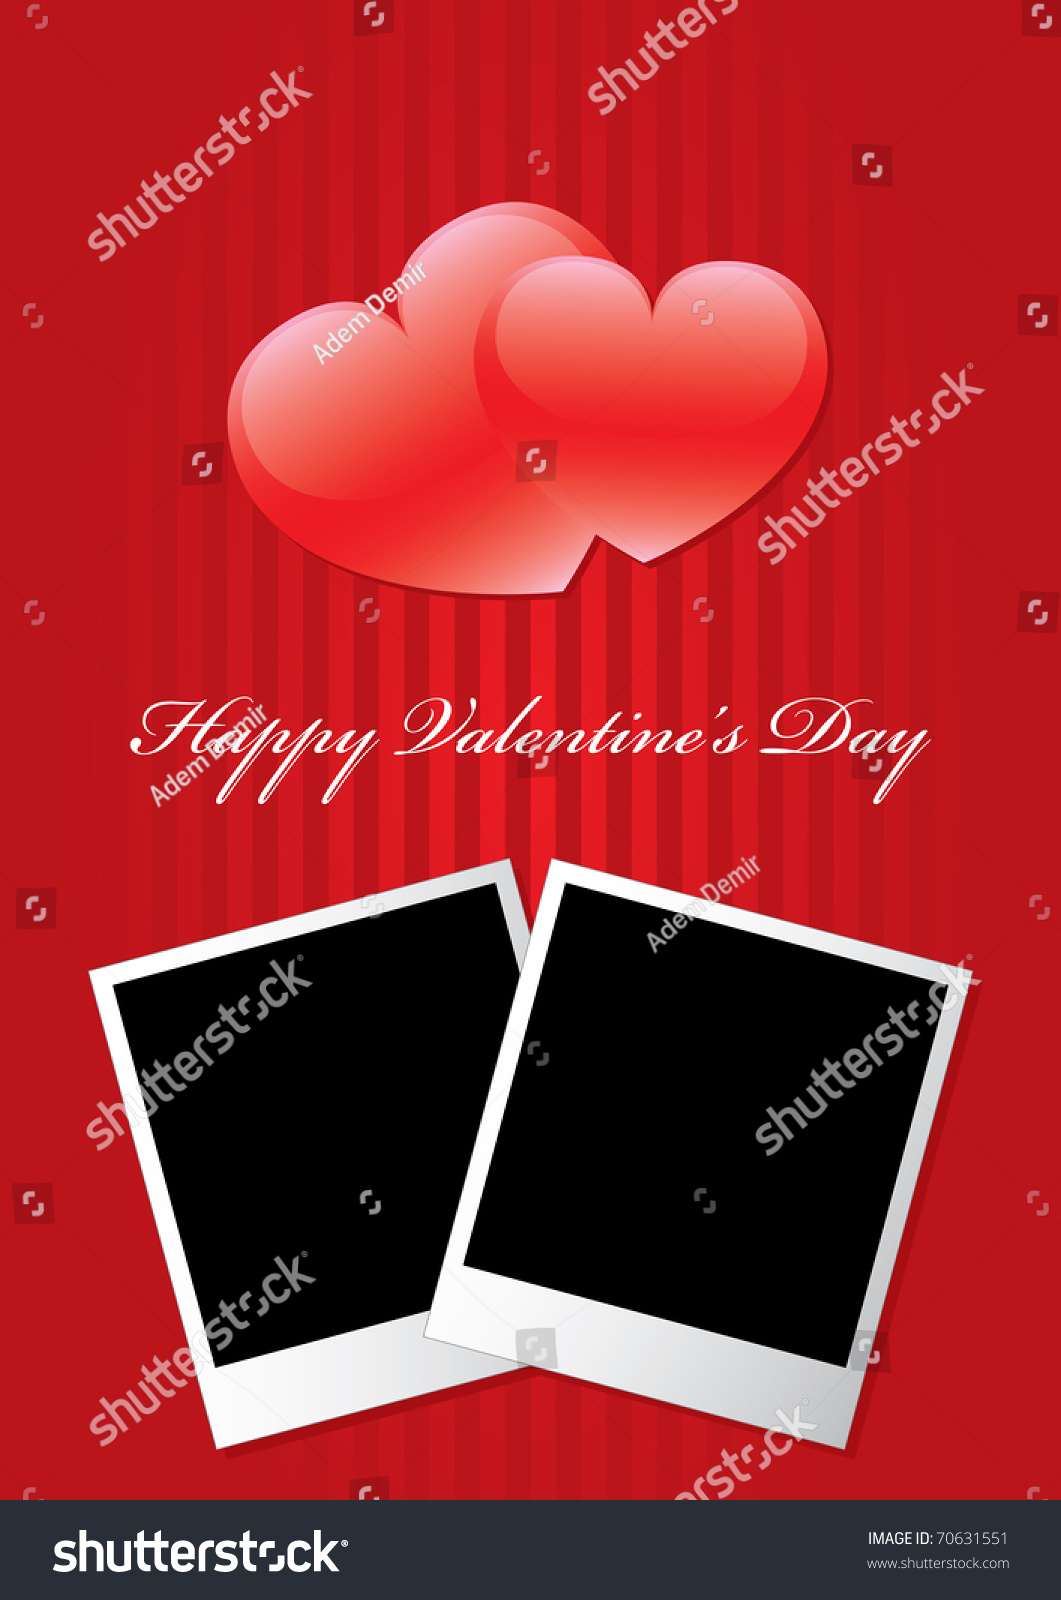 Happy Valentine'S Day Vertical Background With Two Picture Frame Stock Vector ...1061 x 1600